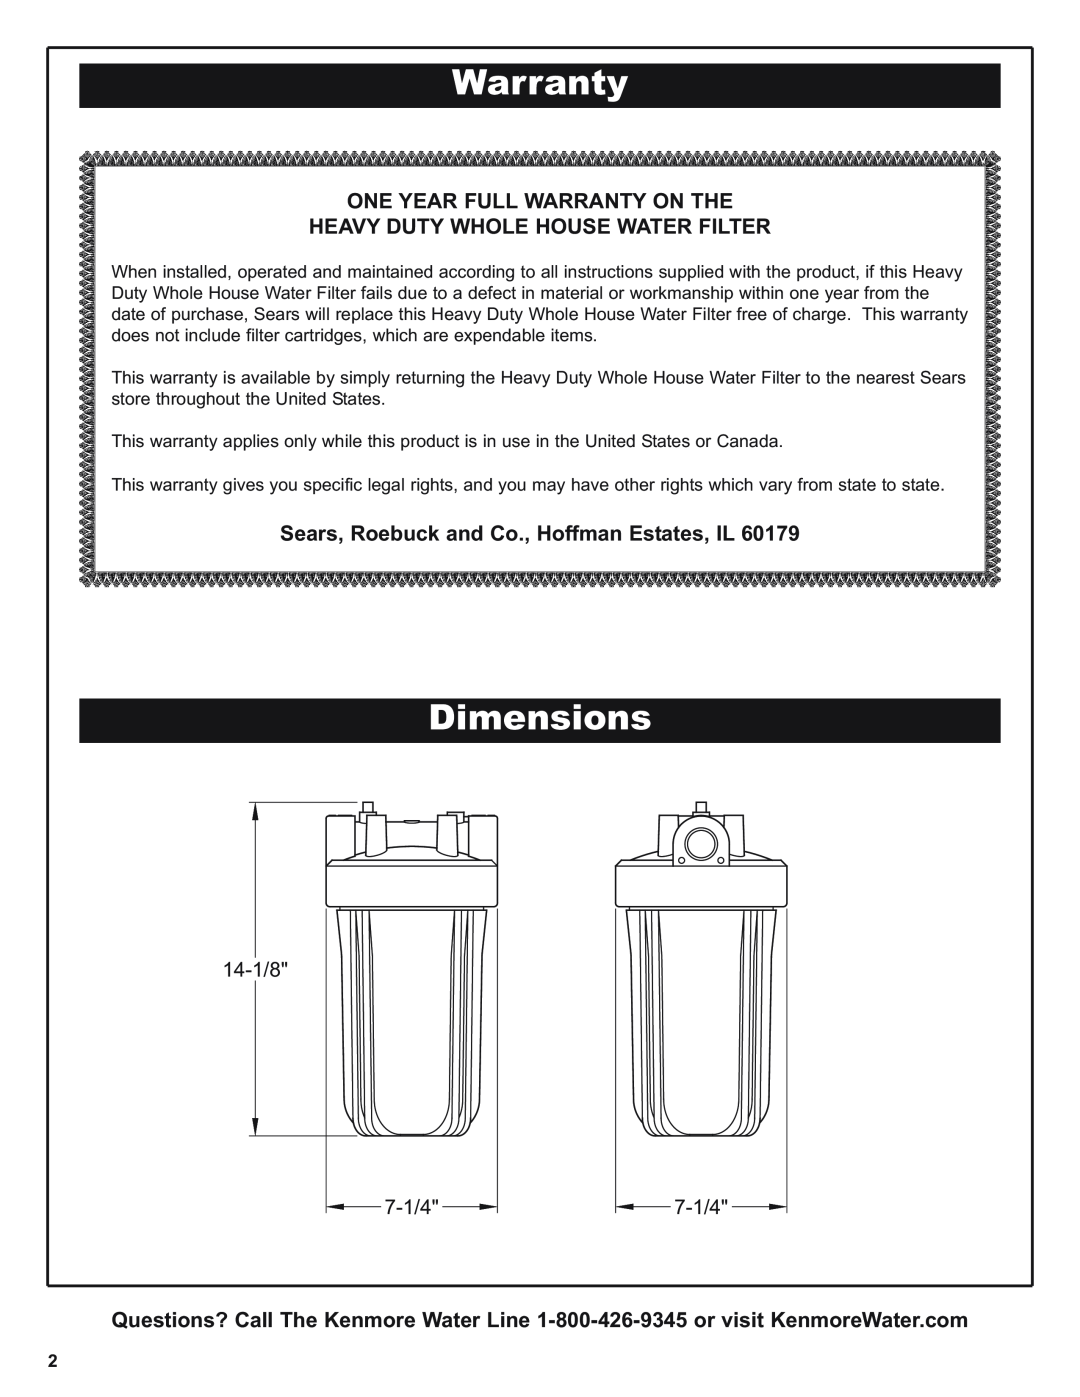 Kenmore 625.38448 Dimensions, One Year Full Warranty On The Heavy Duty Whole House Water Filter, 14-1/8, 7-1/4 